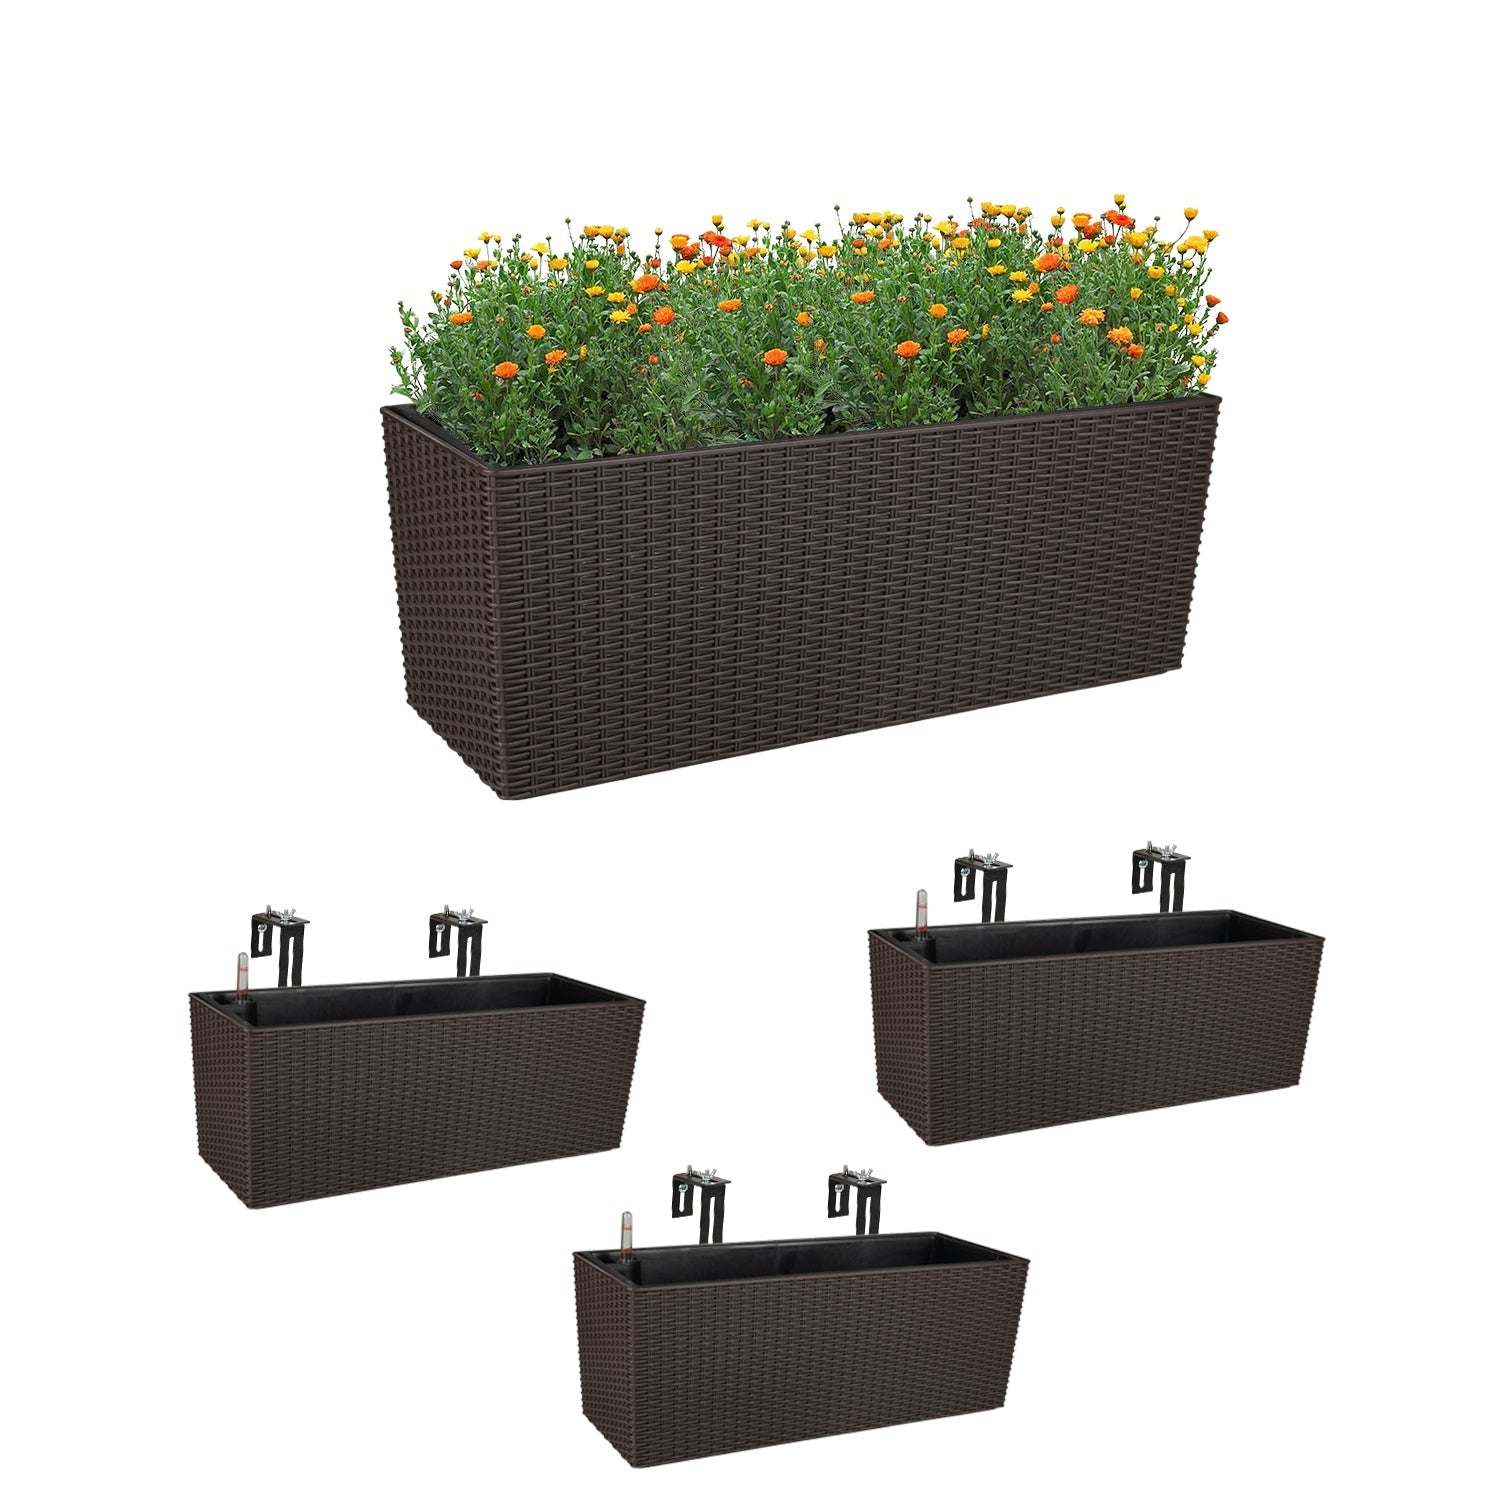 4Pcs 19.5" Rectangular Window Planter Box, Wall Mount/Railing Planter, Self Watering Planter with Adjustable Bracket, for Fence, Balcony and Outdoor Decor - Aoodor LLC